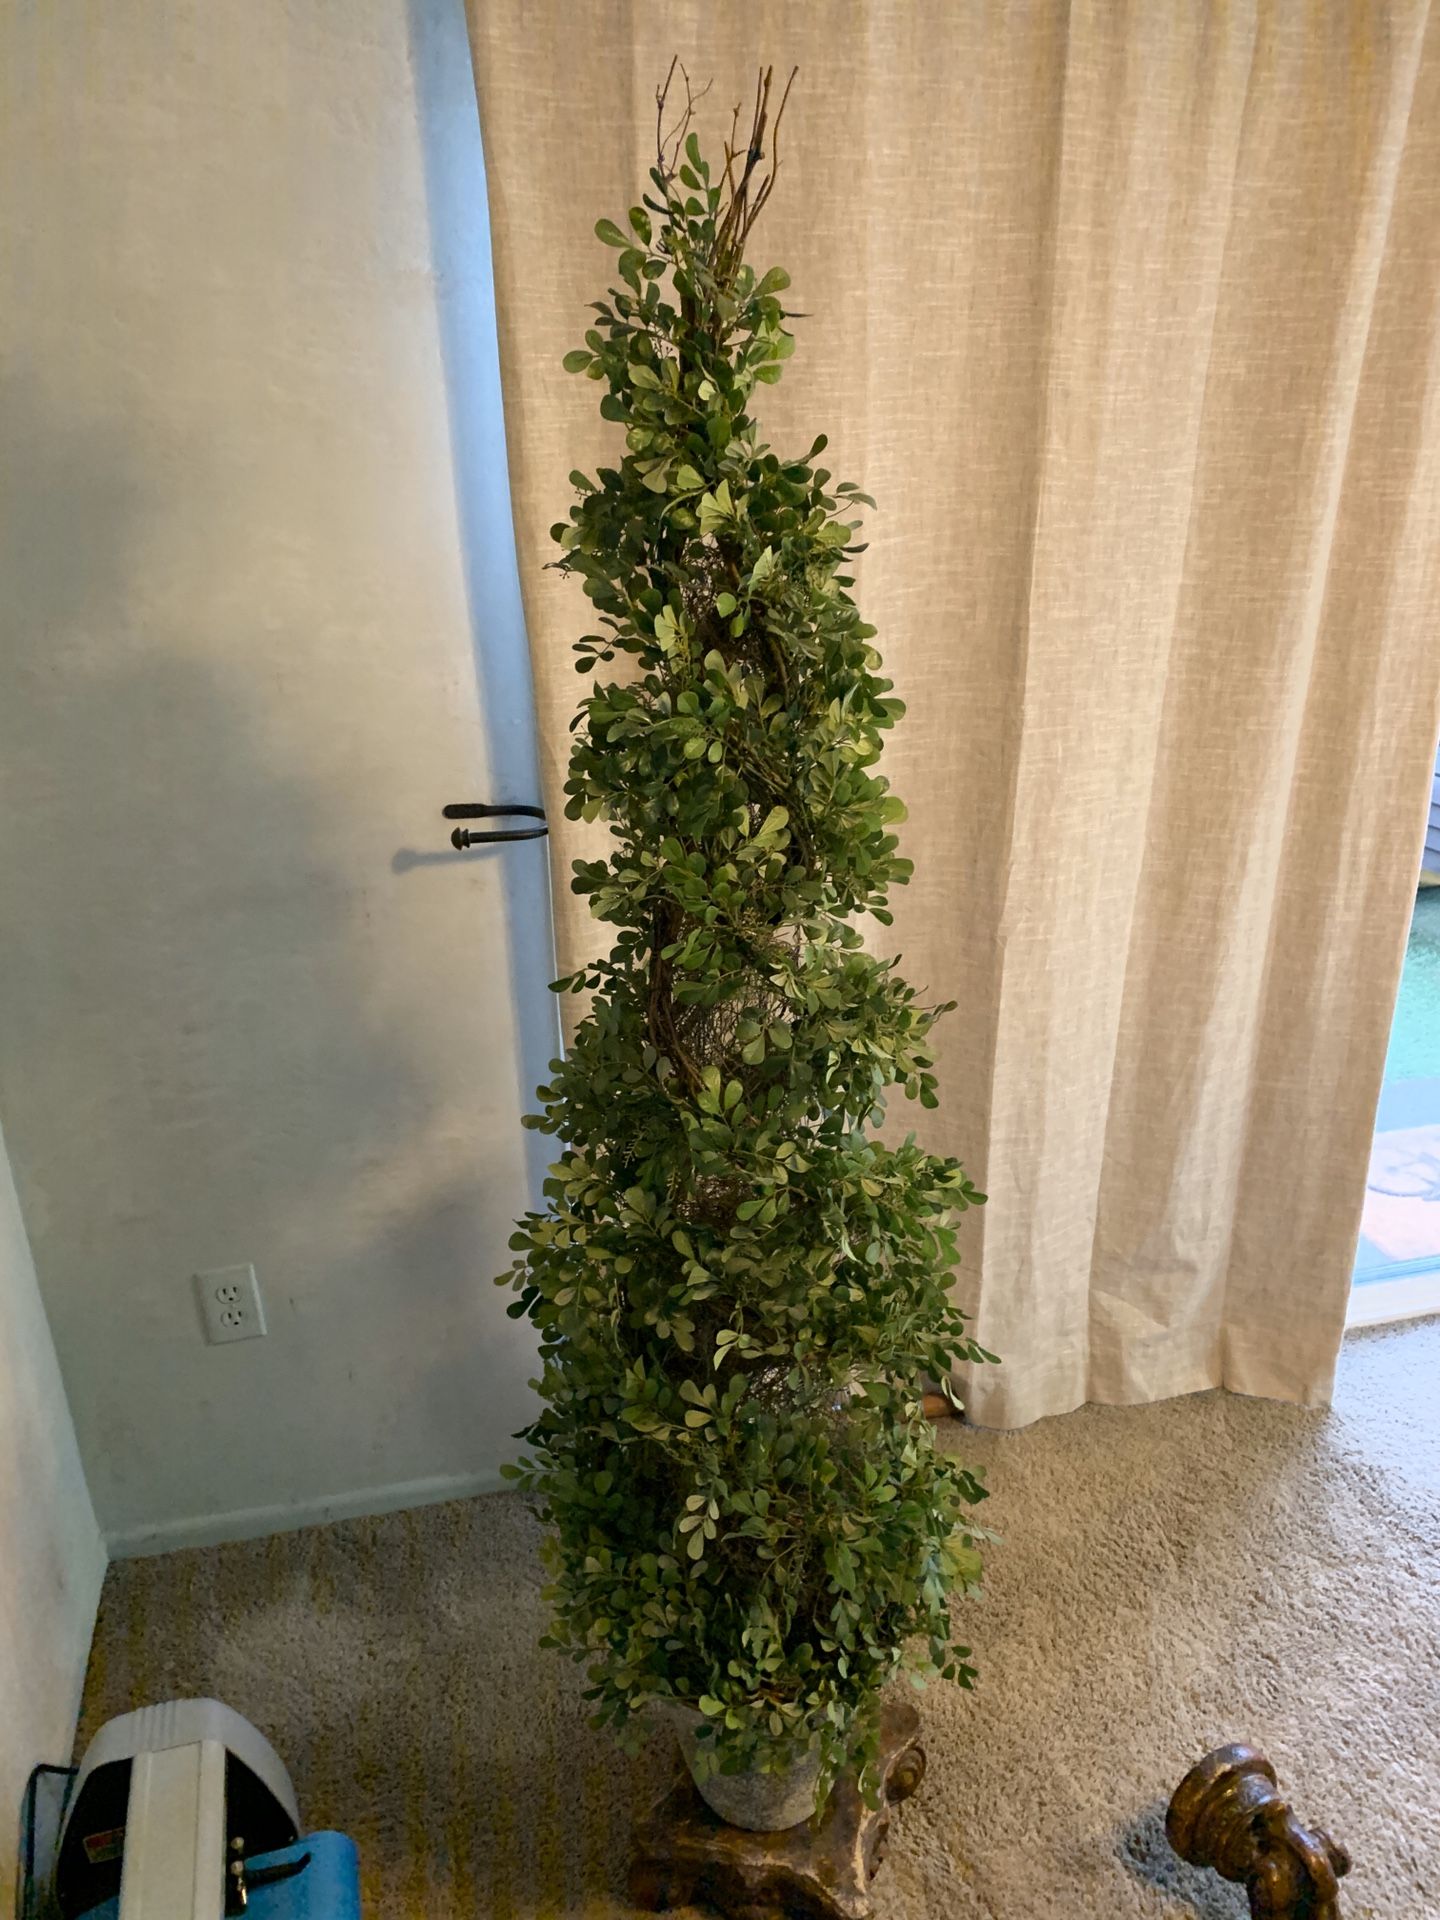 Indoor house tree shrub potted plant (not real)